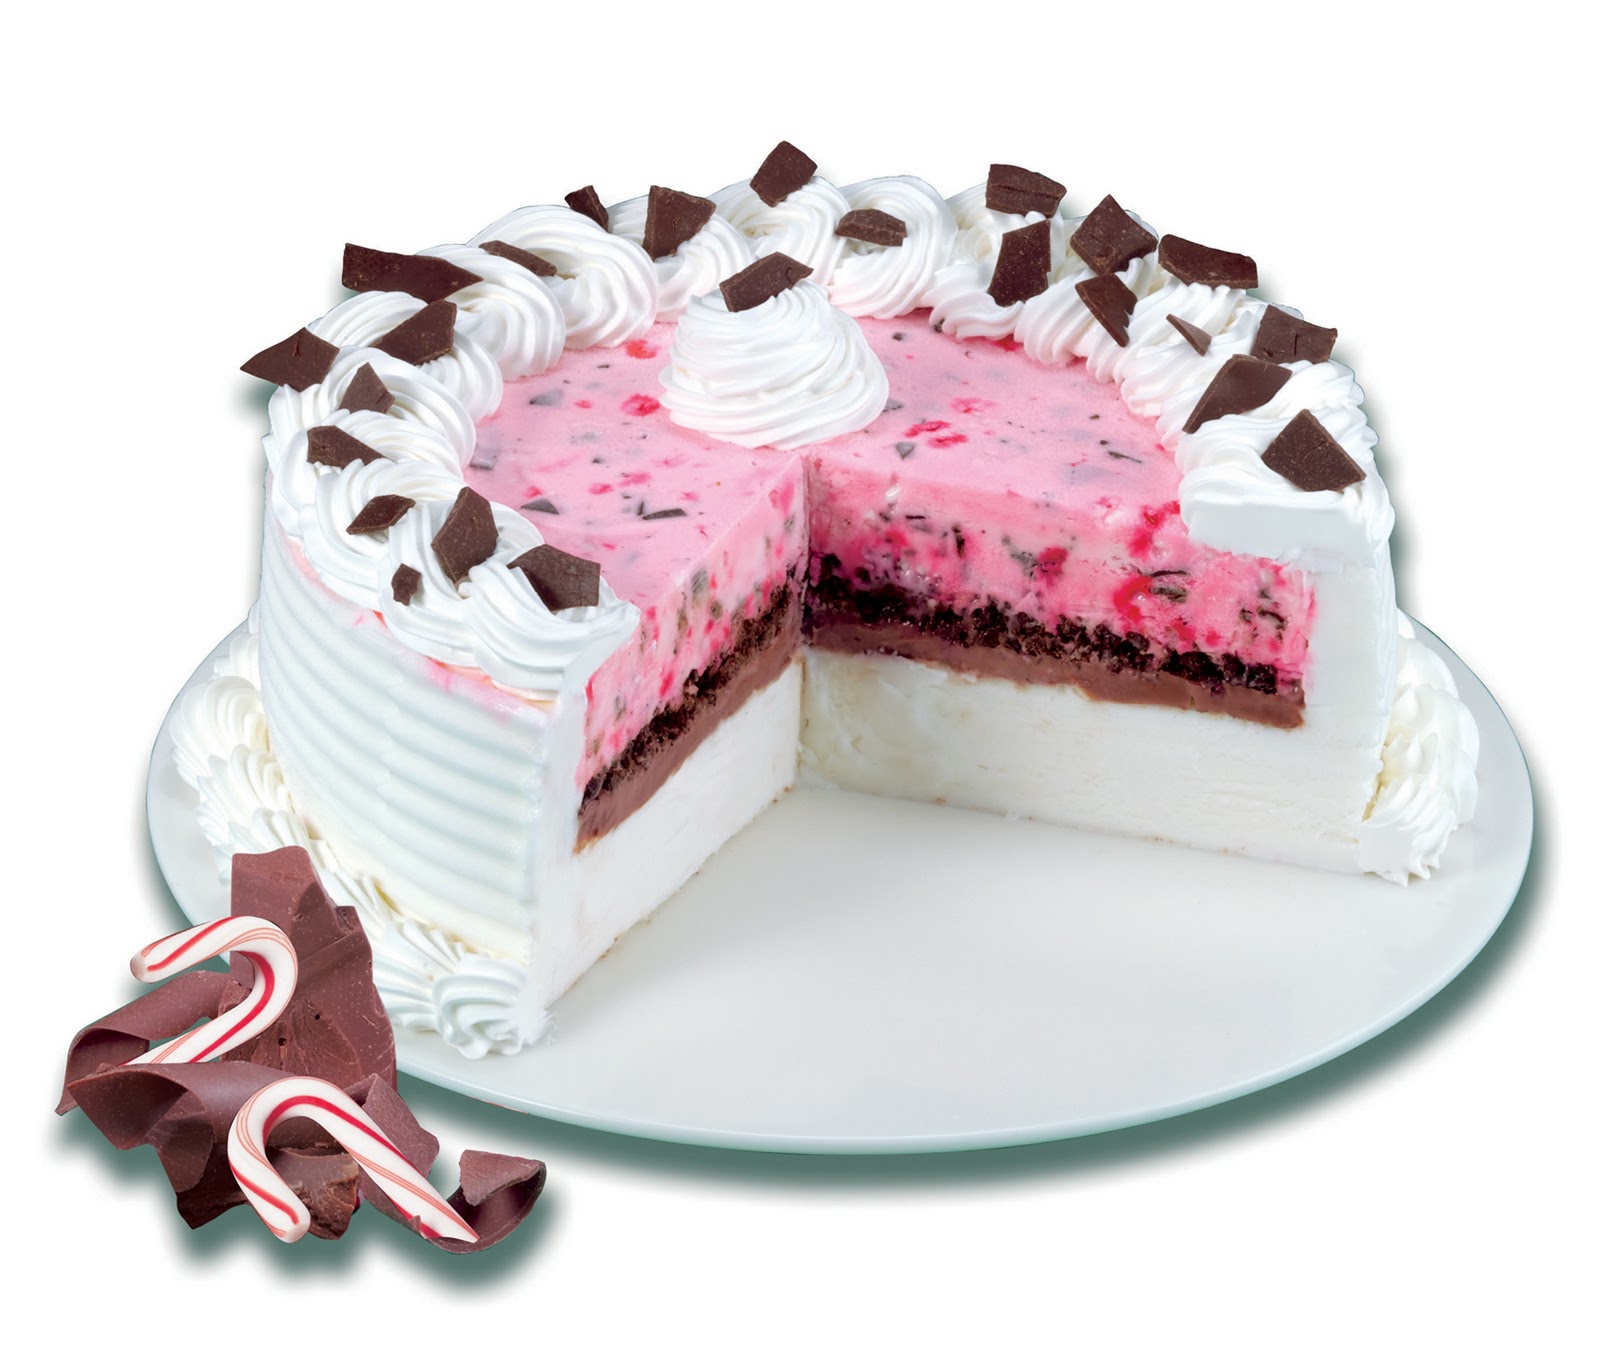 Images Dairy Queen Ice Cream Cake 2015 House Style Pictures